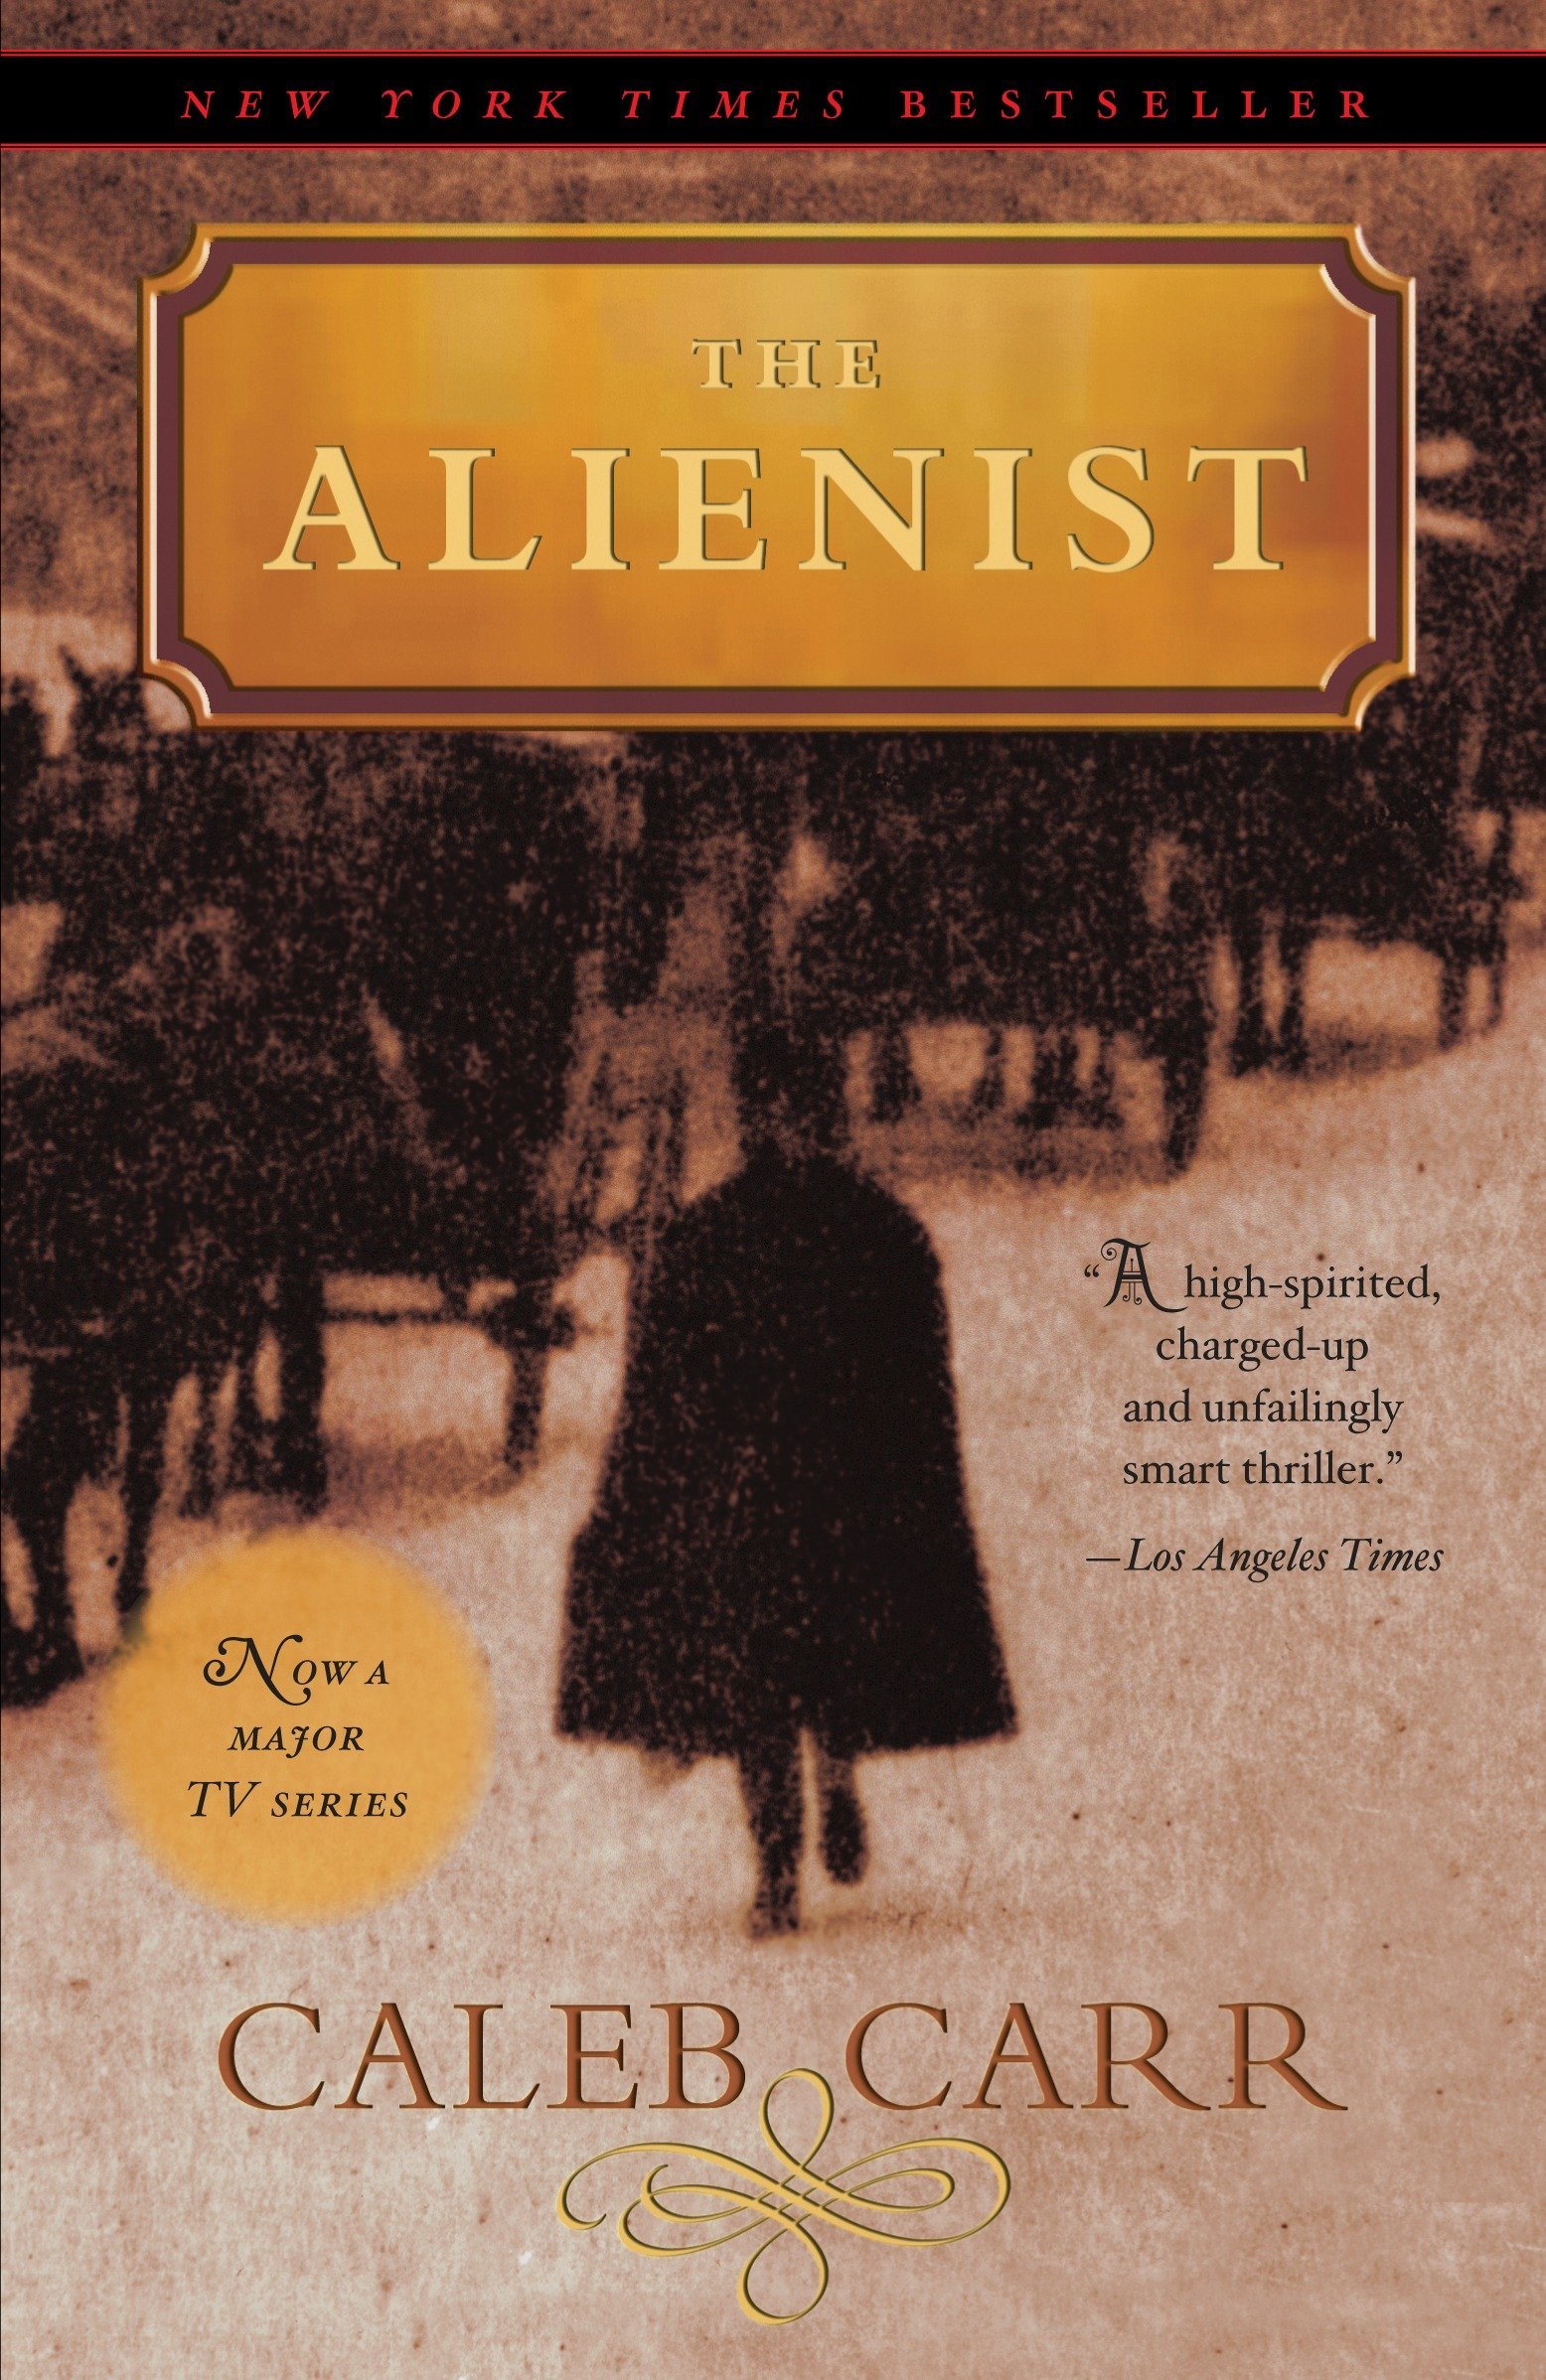 Cover of "The Alienist" by Caleb Carr